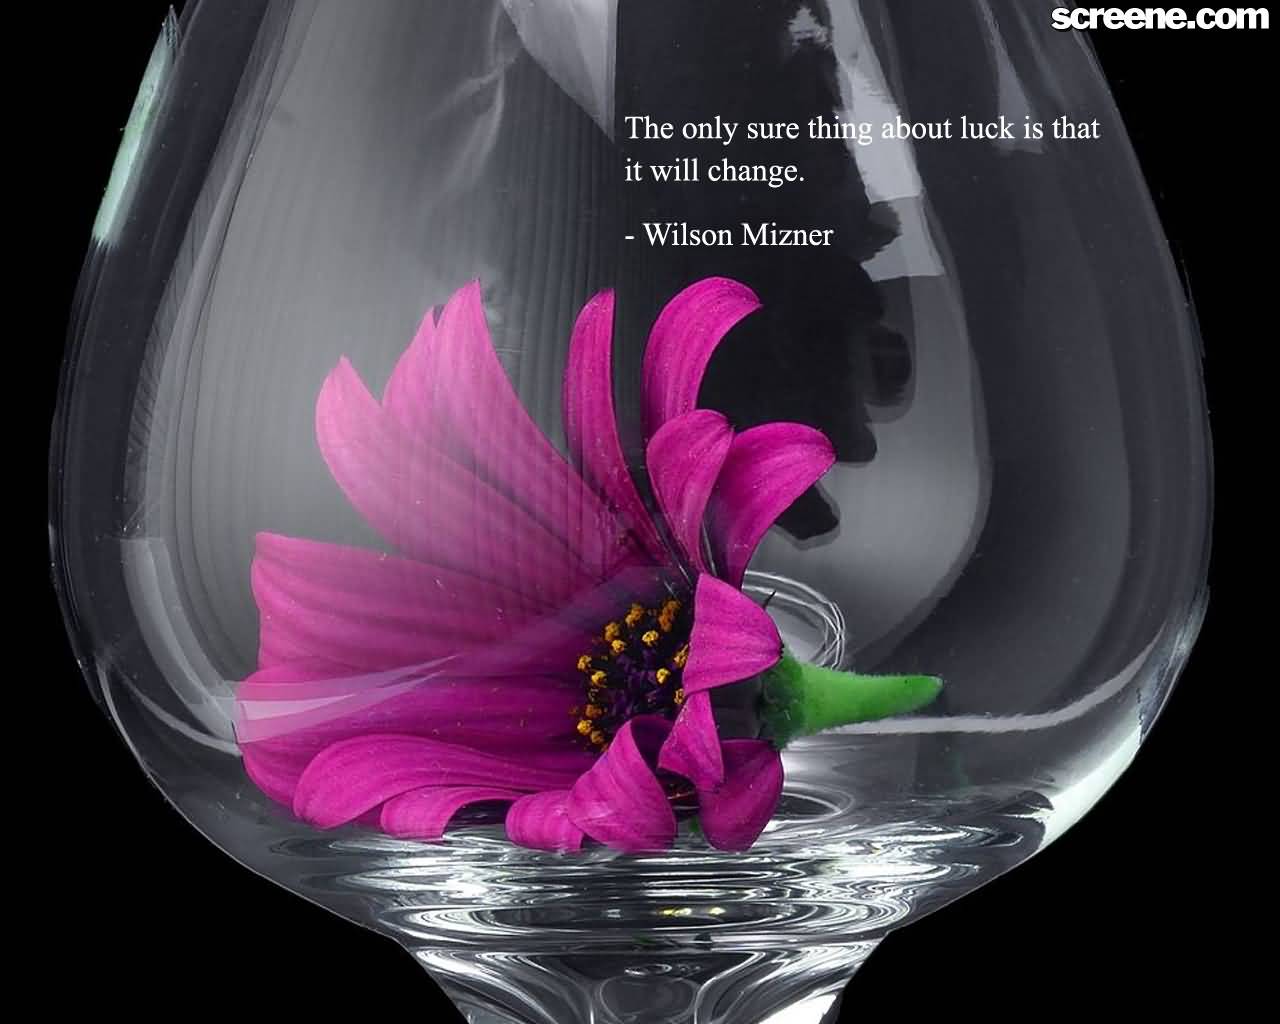 The only sure thing about luck is that it will change  - Wilson Mizner